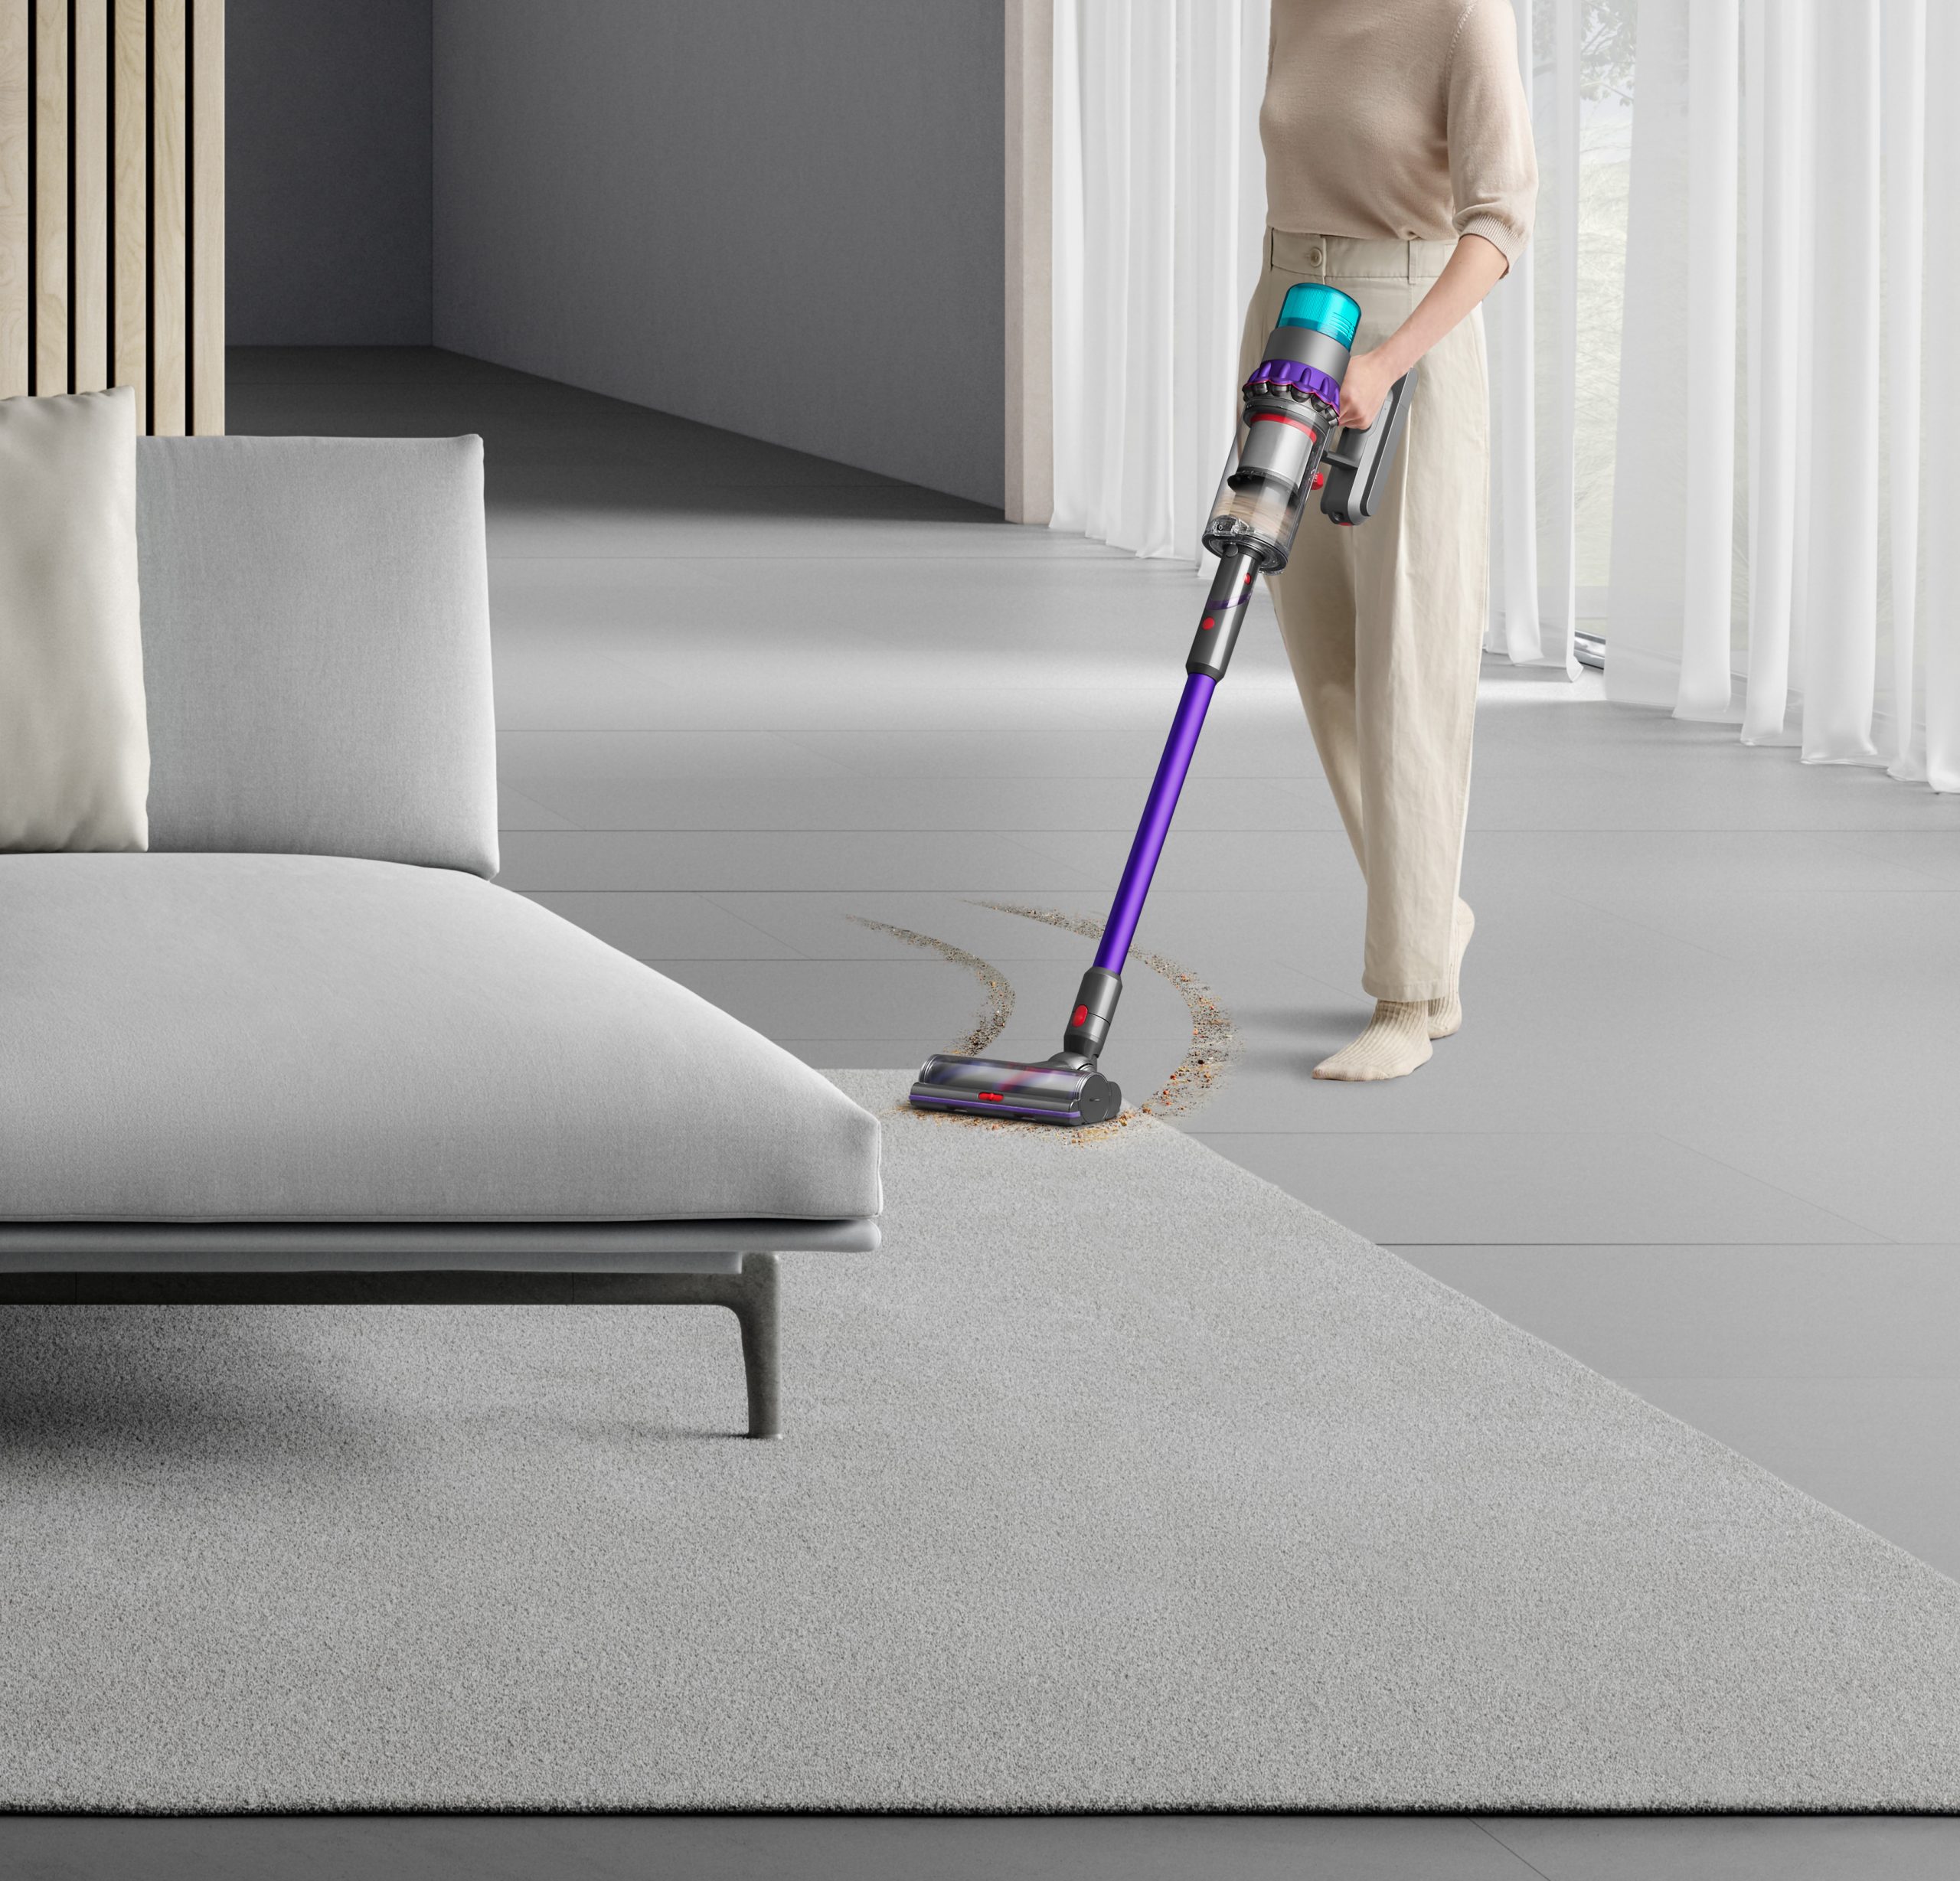 Dyson launching their newest, most cordless vacuum cleaner